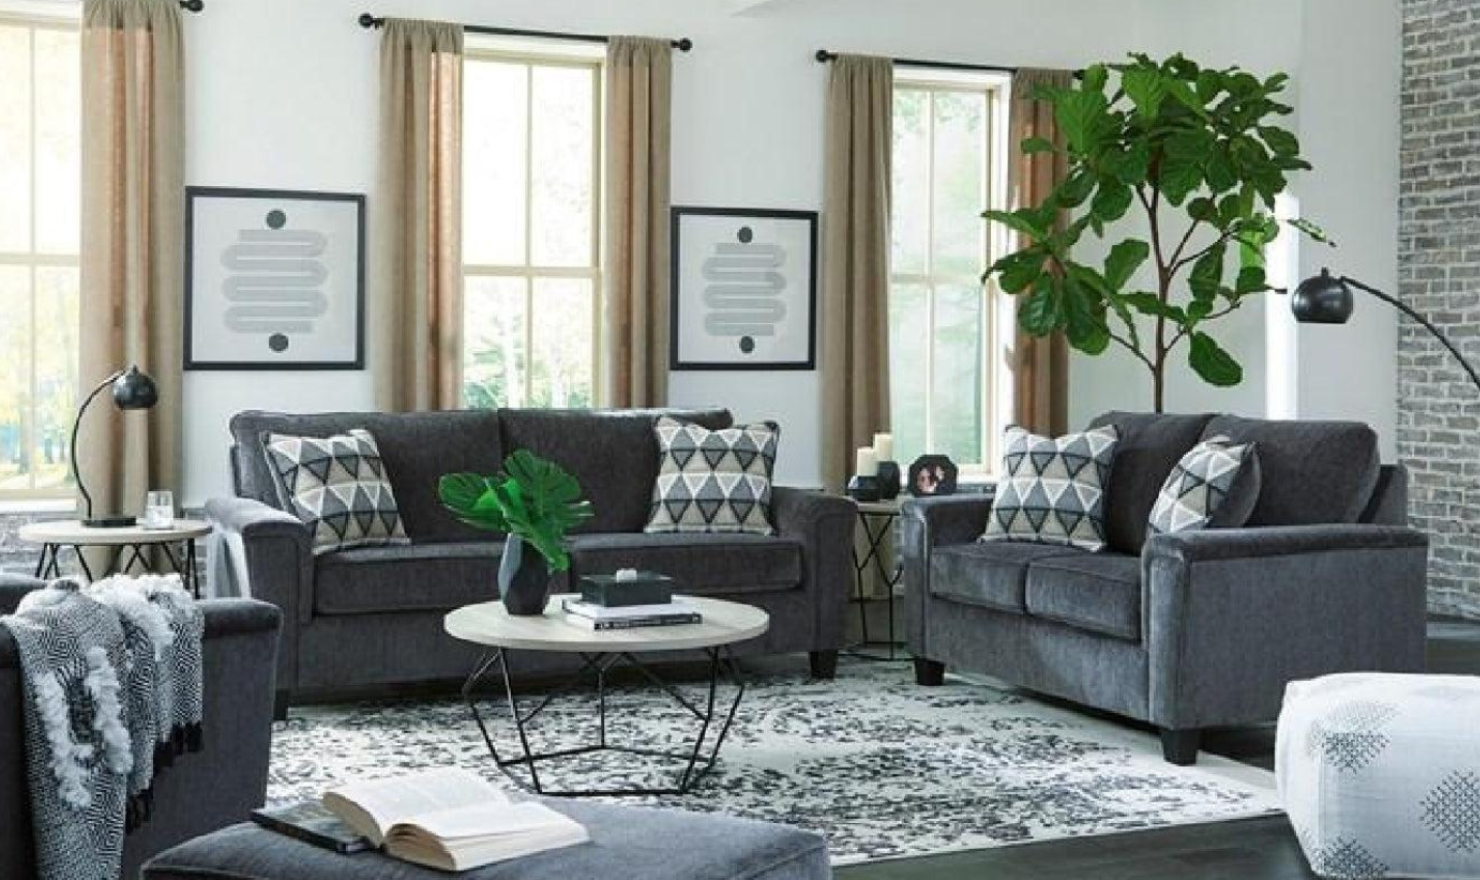 15 Creative Sectional Sofa Ideas for Your Living Room